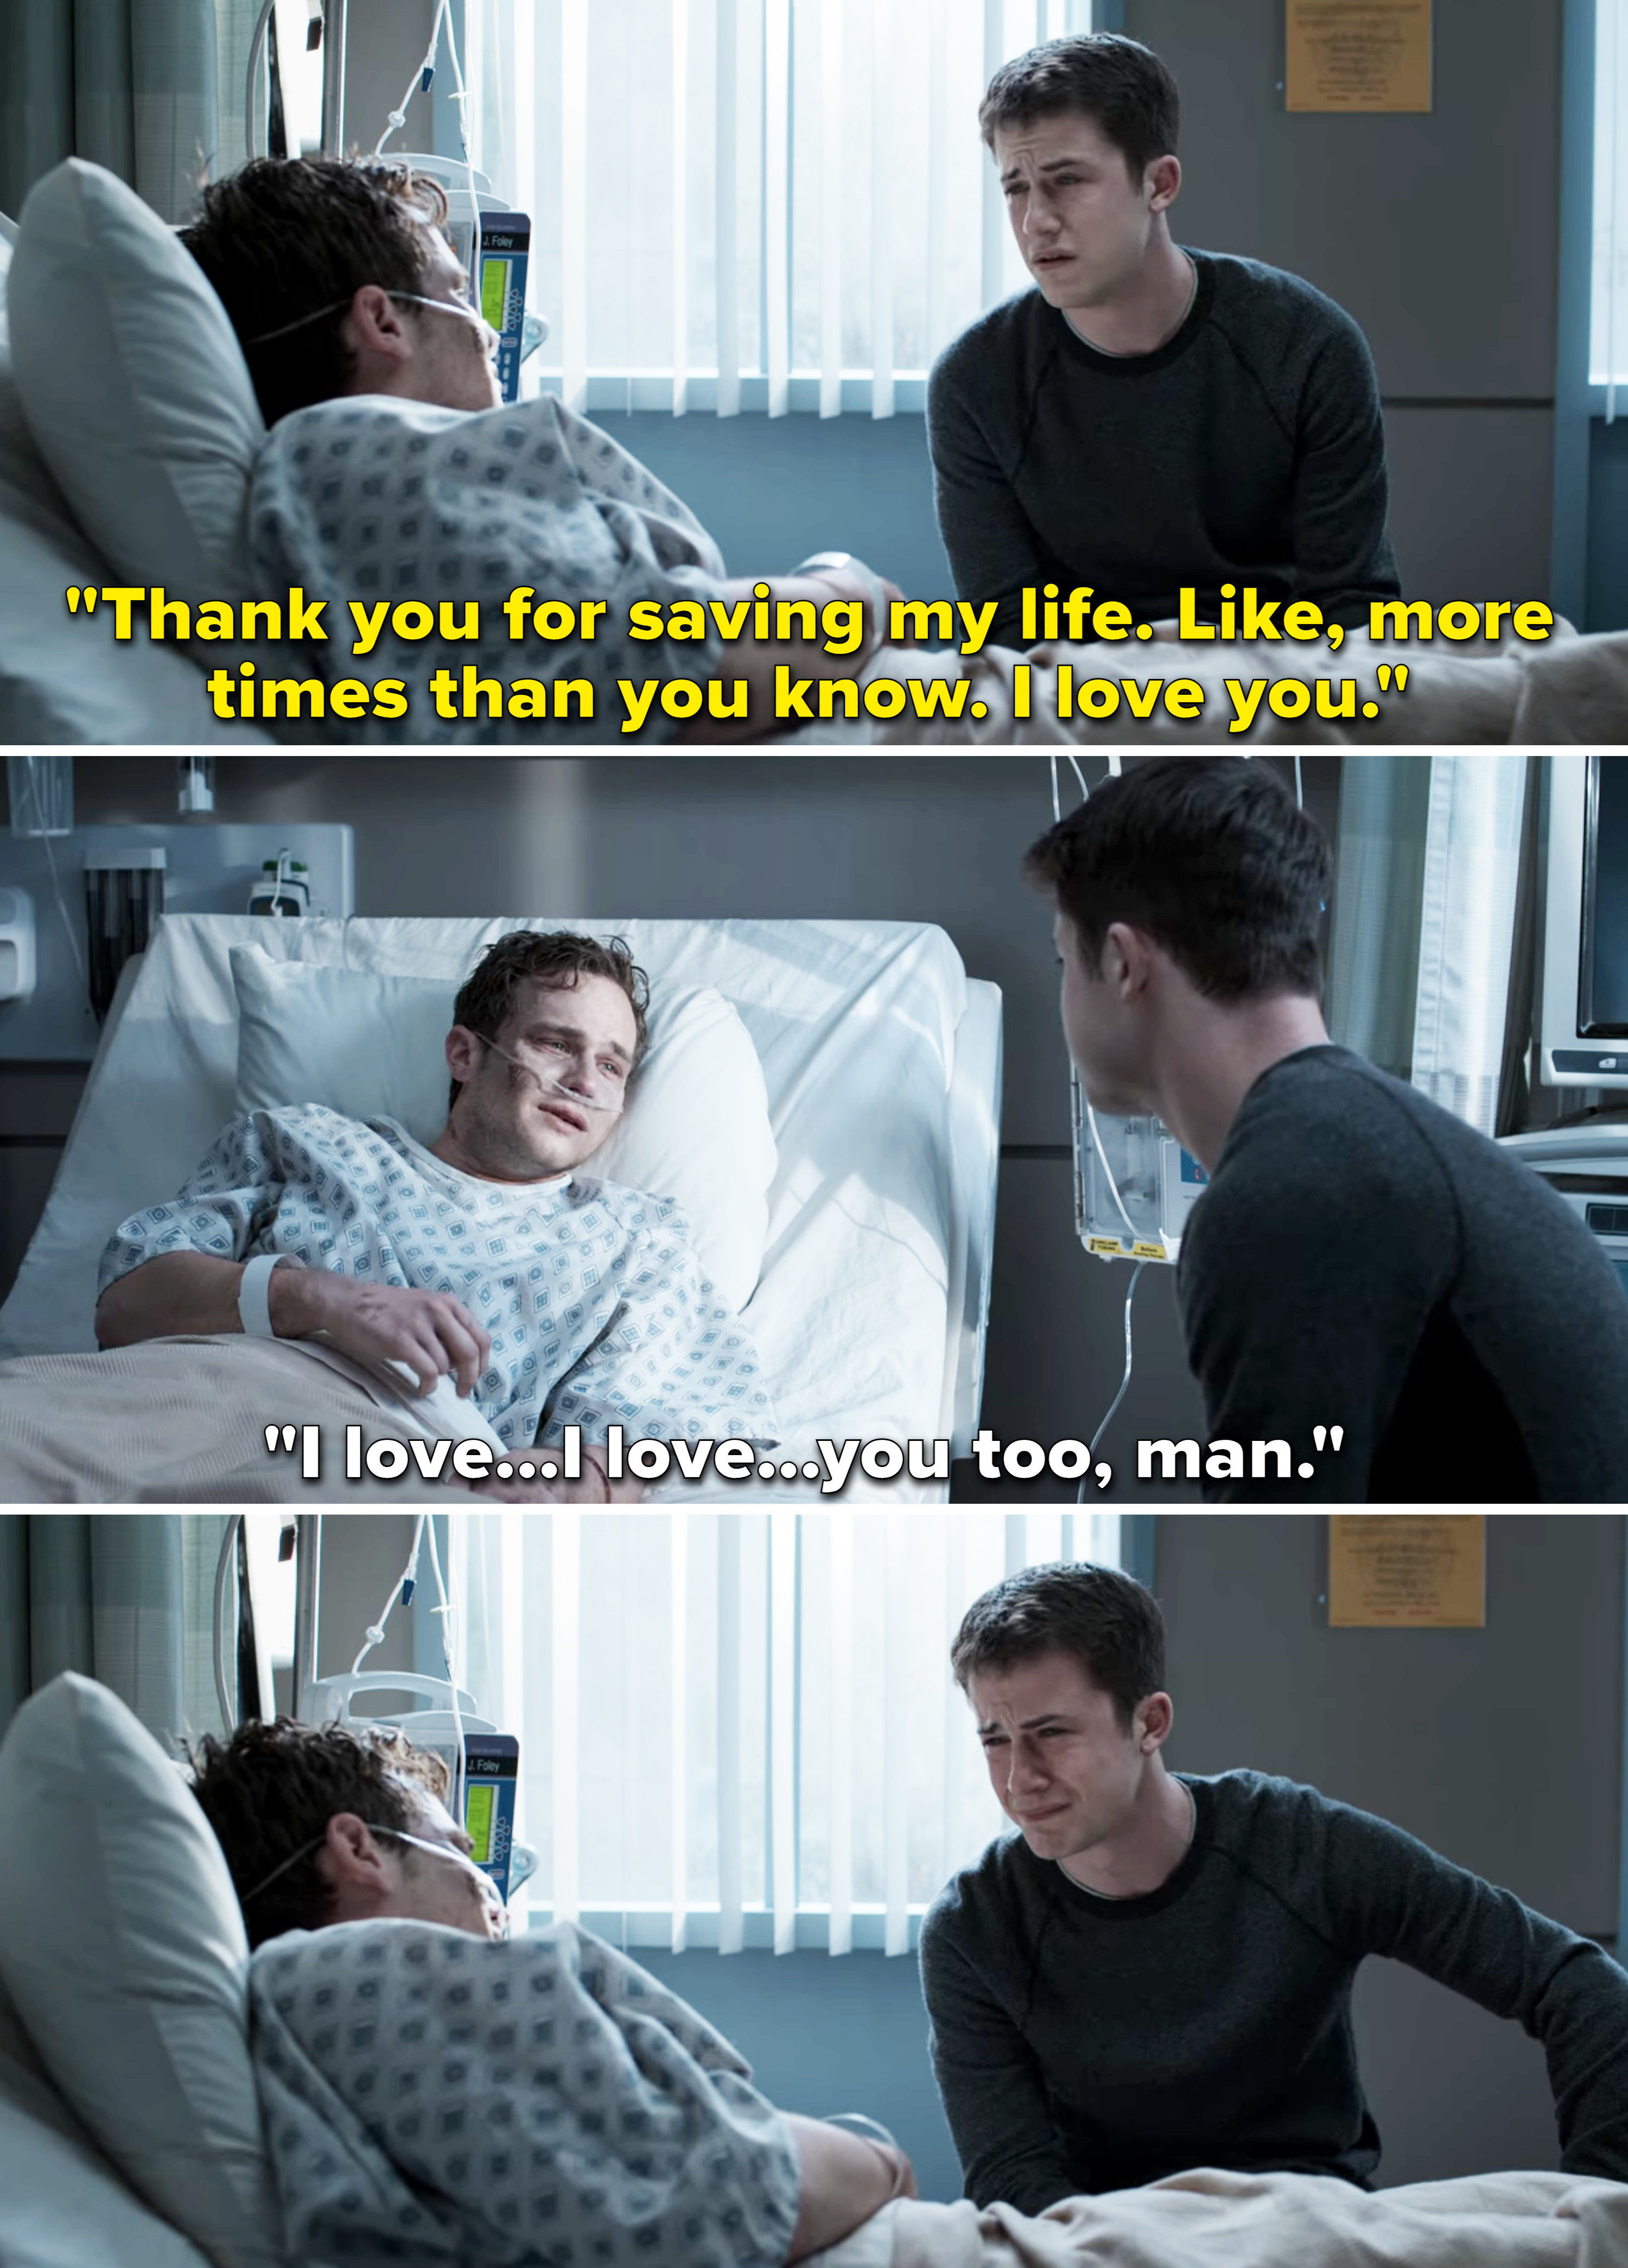 in the hospital bed, the character struggles to tell another character that he also loves him